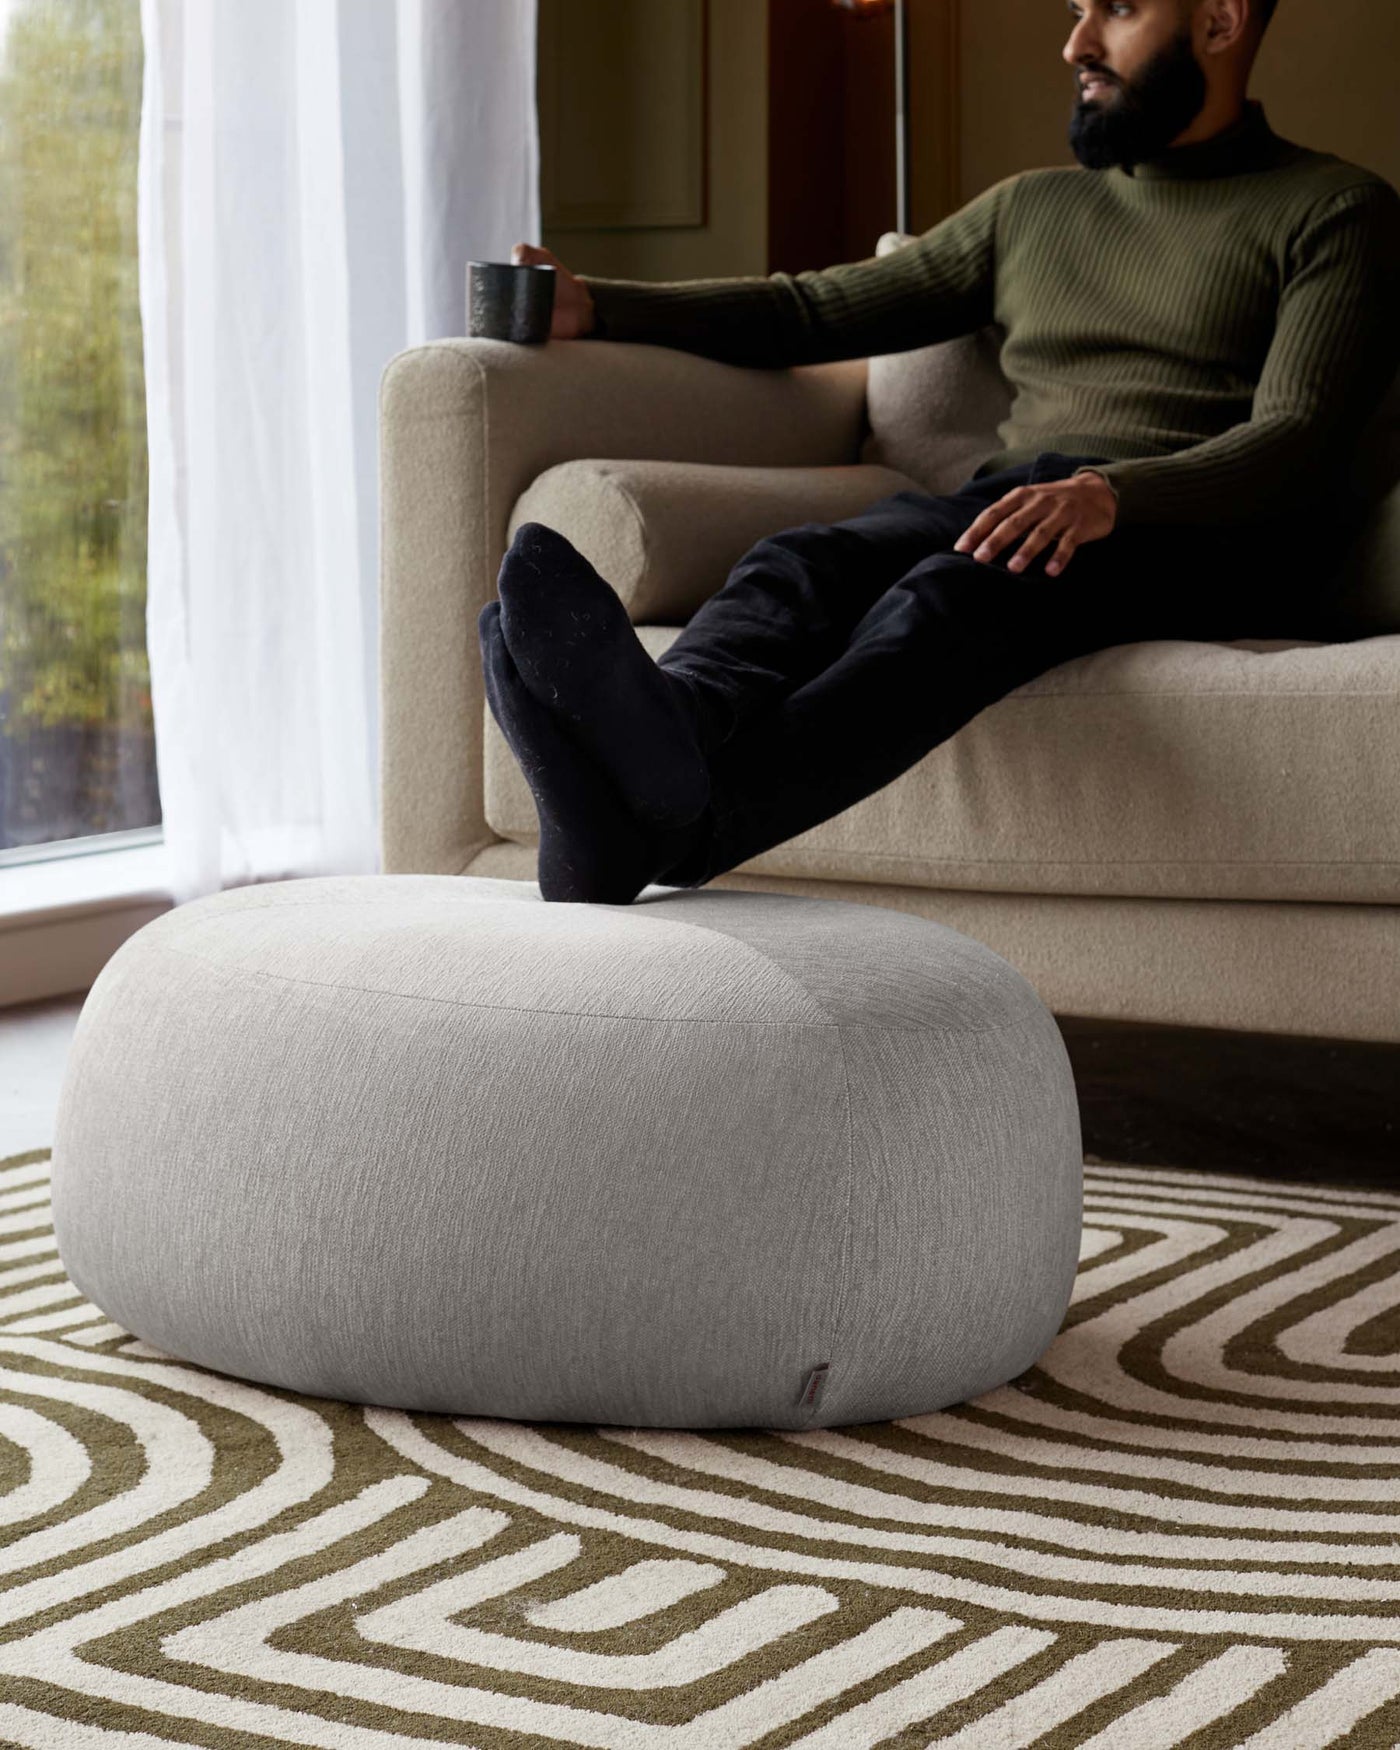 A neutral-toned modern fabric ottoman with a smooth, rounded design resting on a geometric patterned area rug in shades of beige and light brown. A beige contemporary sofa with clean lines is partially visible to complement the ottoman.